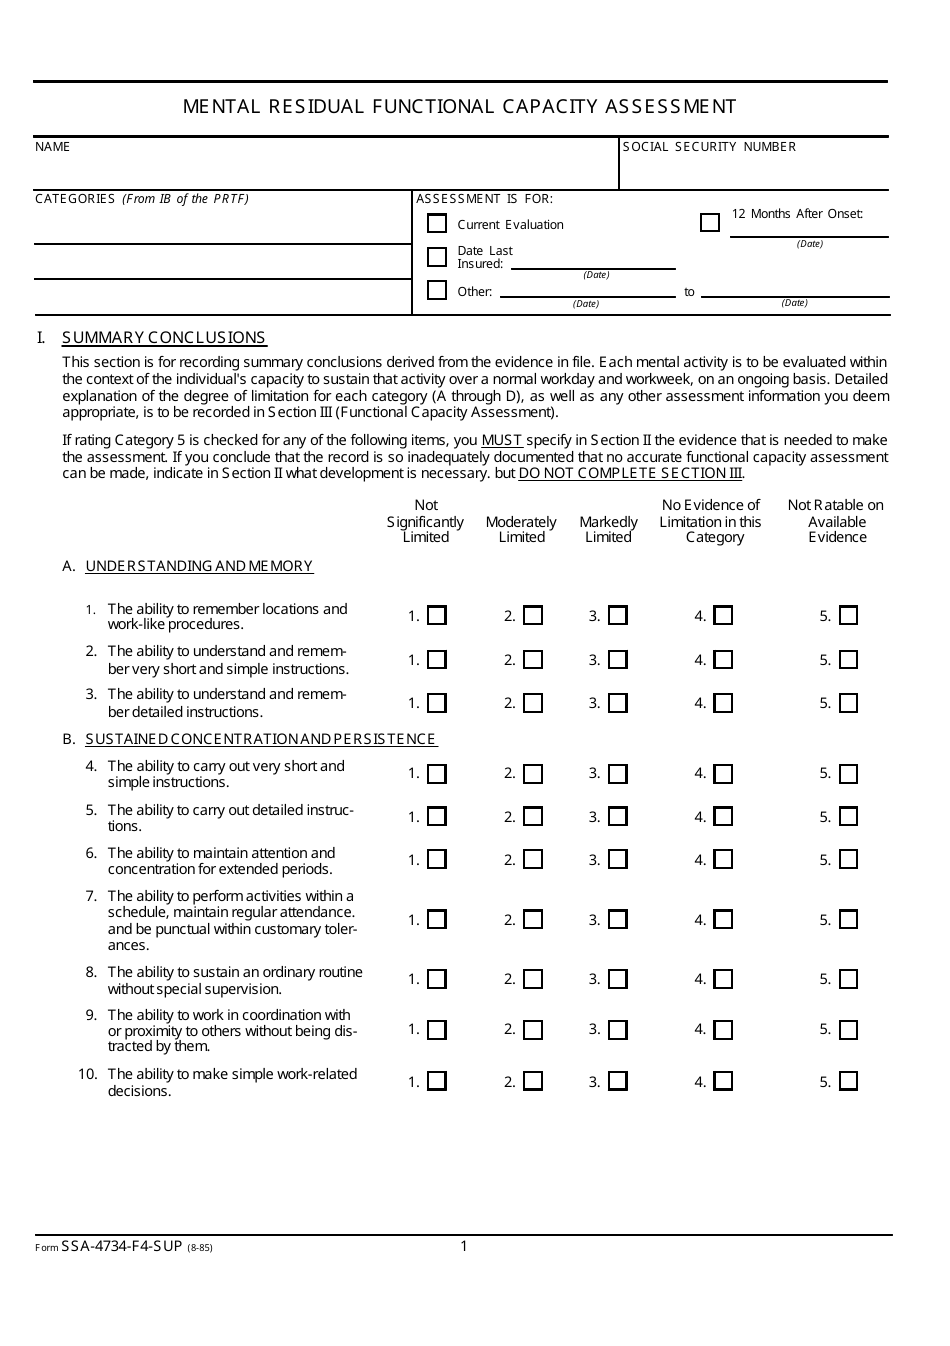 Form SSA-4734-F4-SUP Mental Residual Functional Capacity Assessment, Page 1